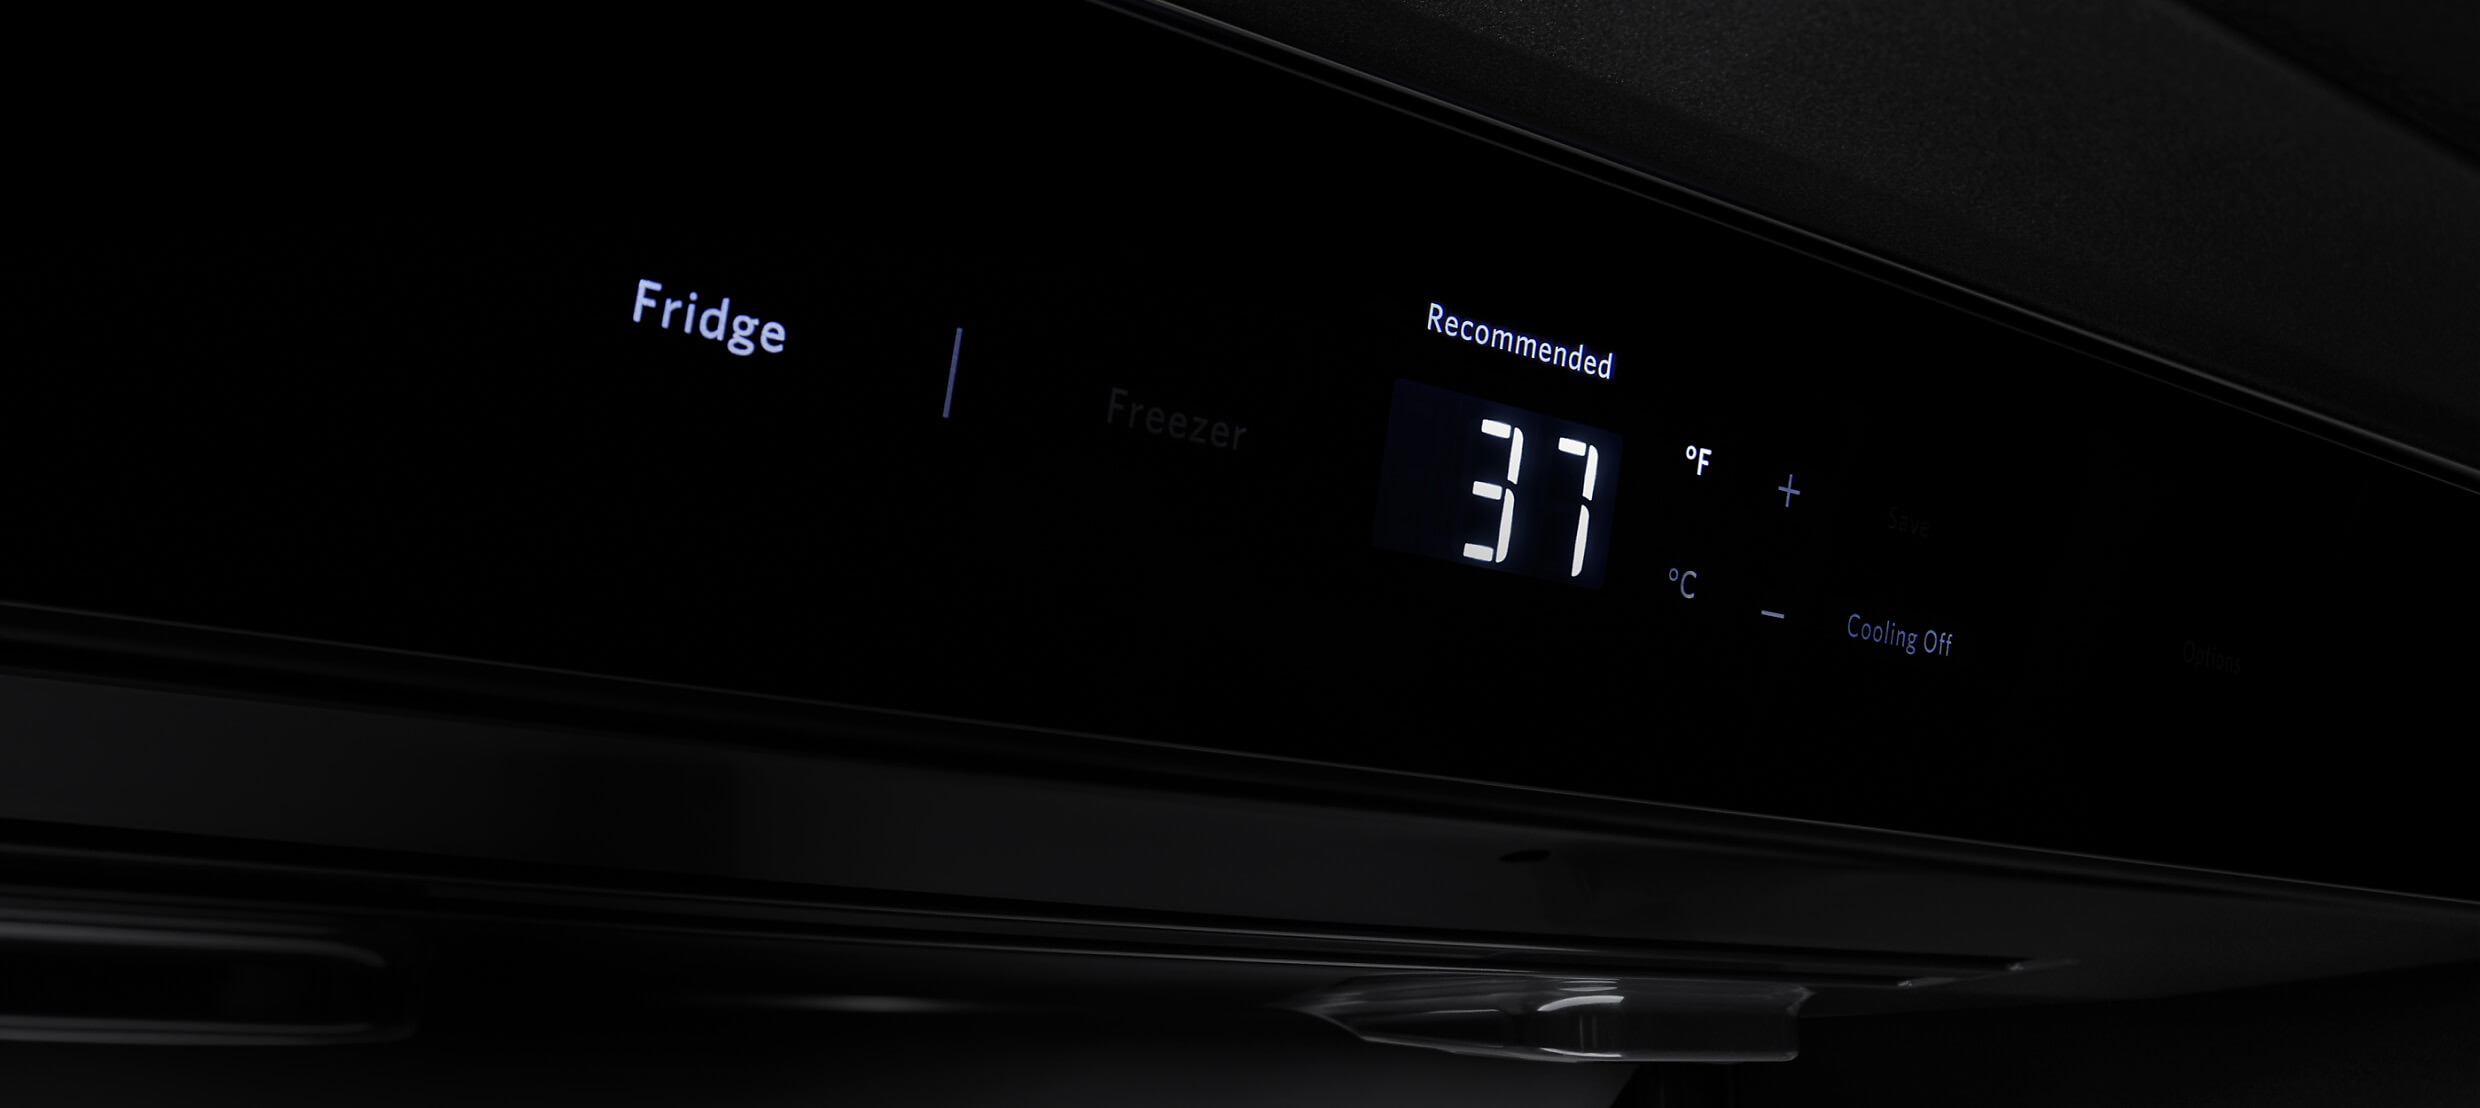  The touch UI of a built-in refrigerator, showing the refrigerator temperature.